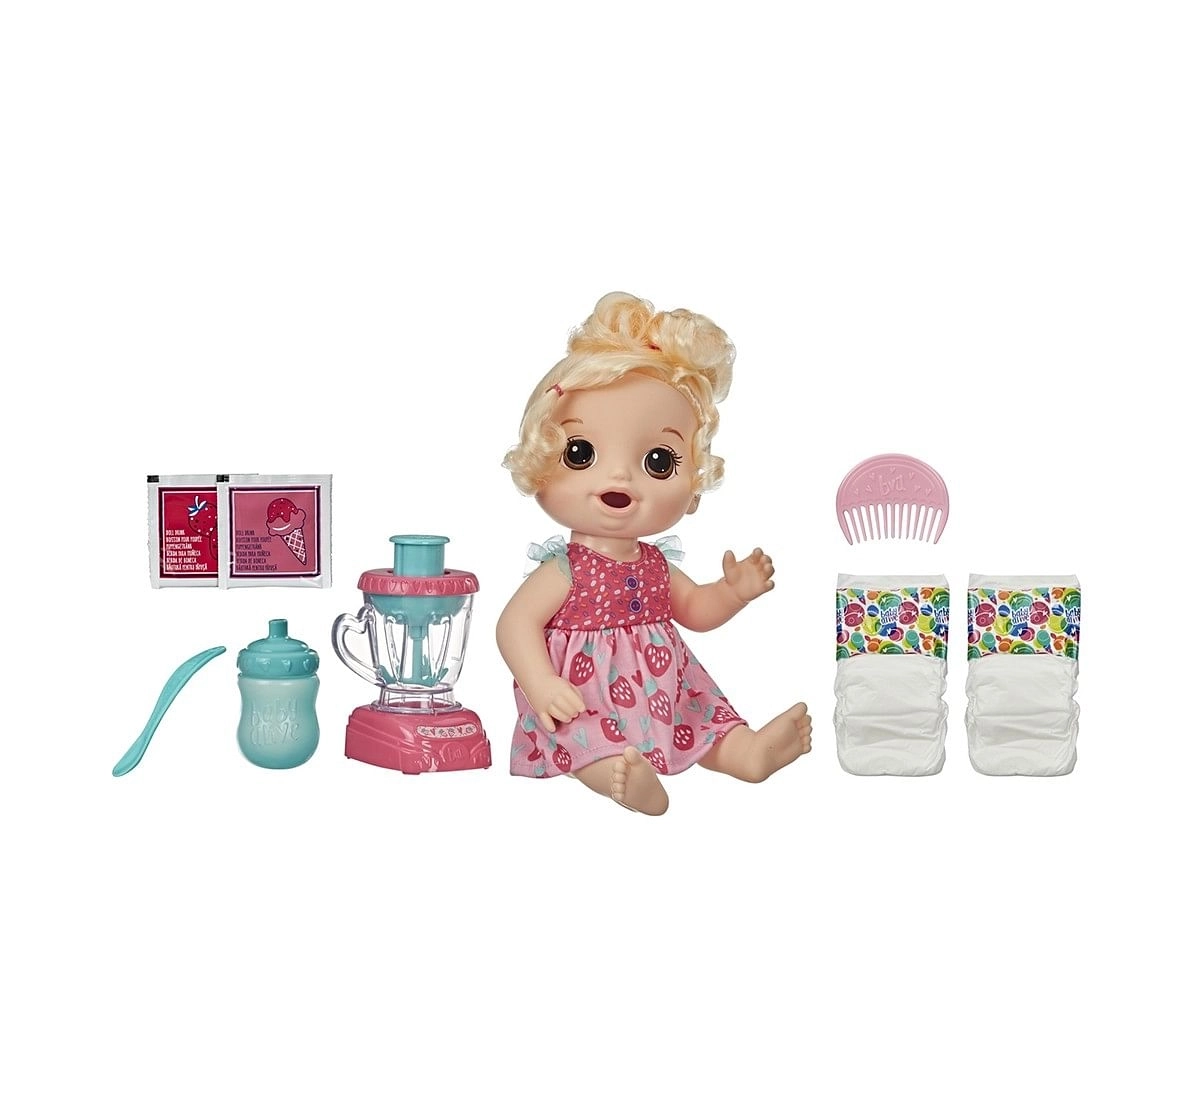 Baby Alive Magical Mixer Baby Doll Strawberry Shake with Blender Accessories, Drinks, Wets, Eats, Blonde Hair Dolls & Accessories for Ages 3 and Up  